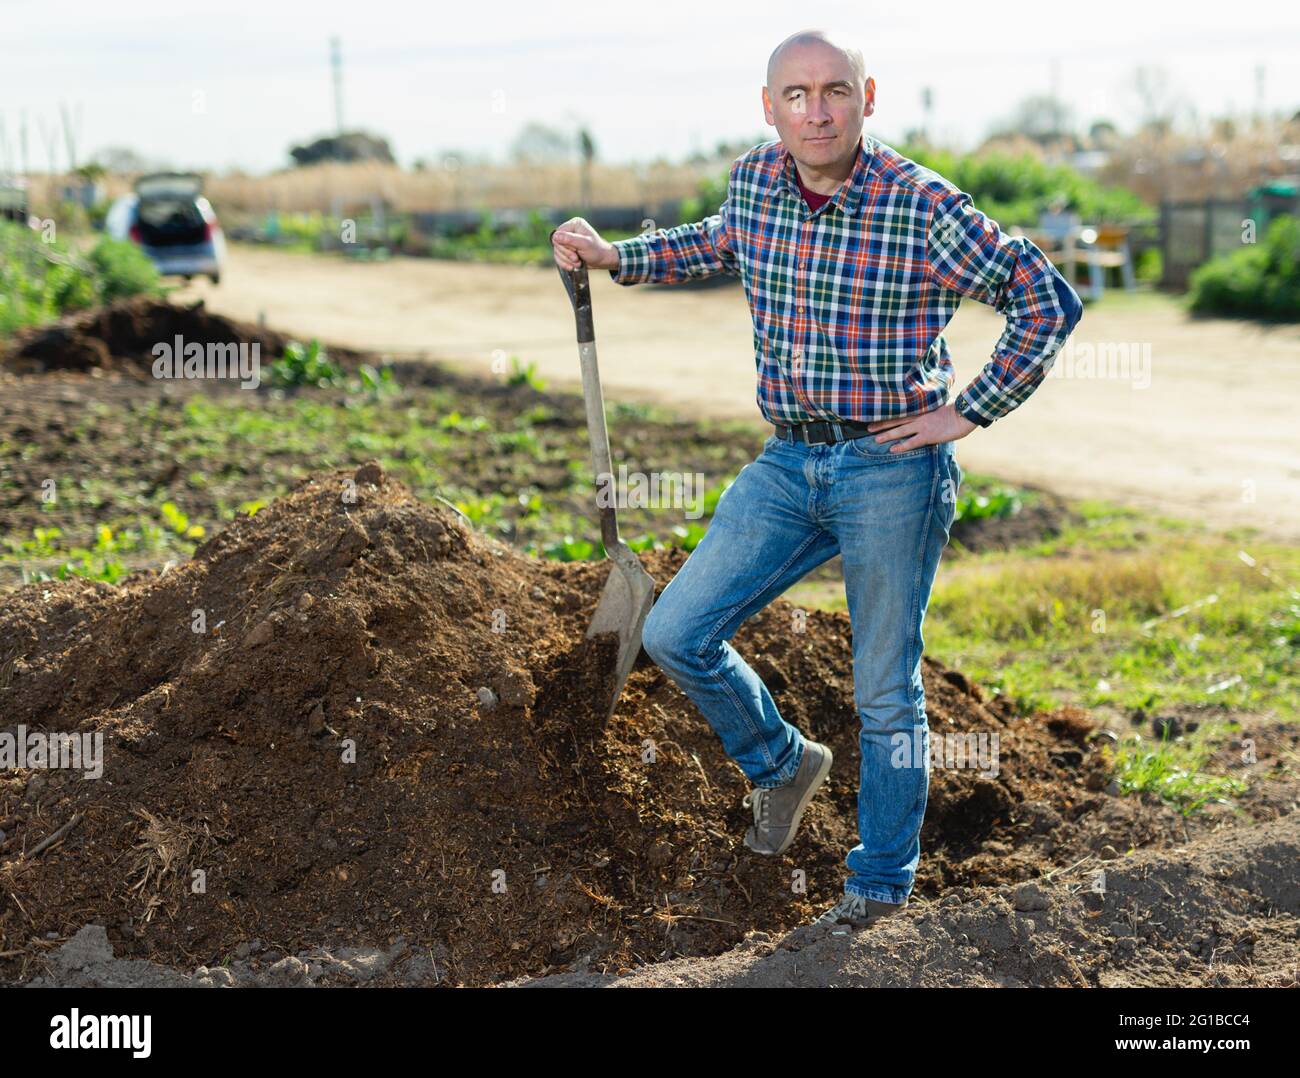 Middle-aged man scattering peat shovel on garden beds Stock Photo - Alamy